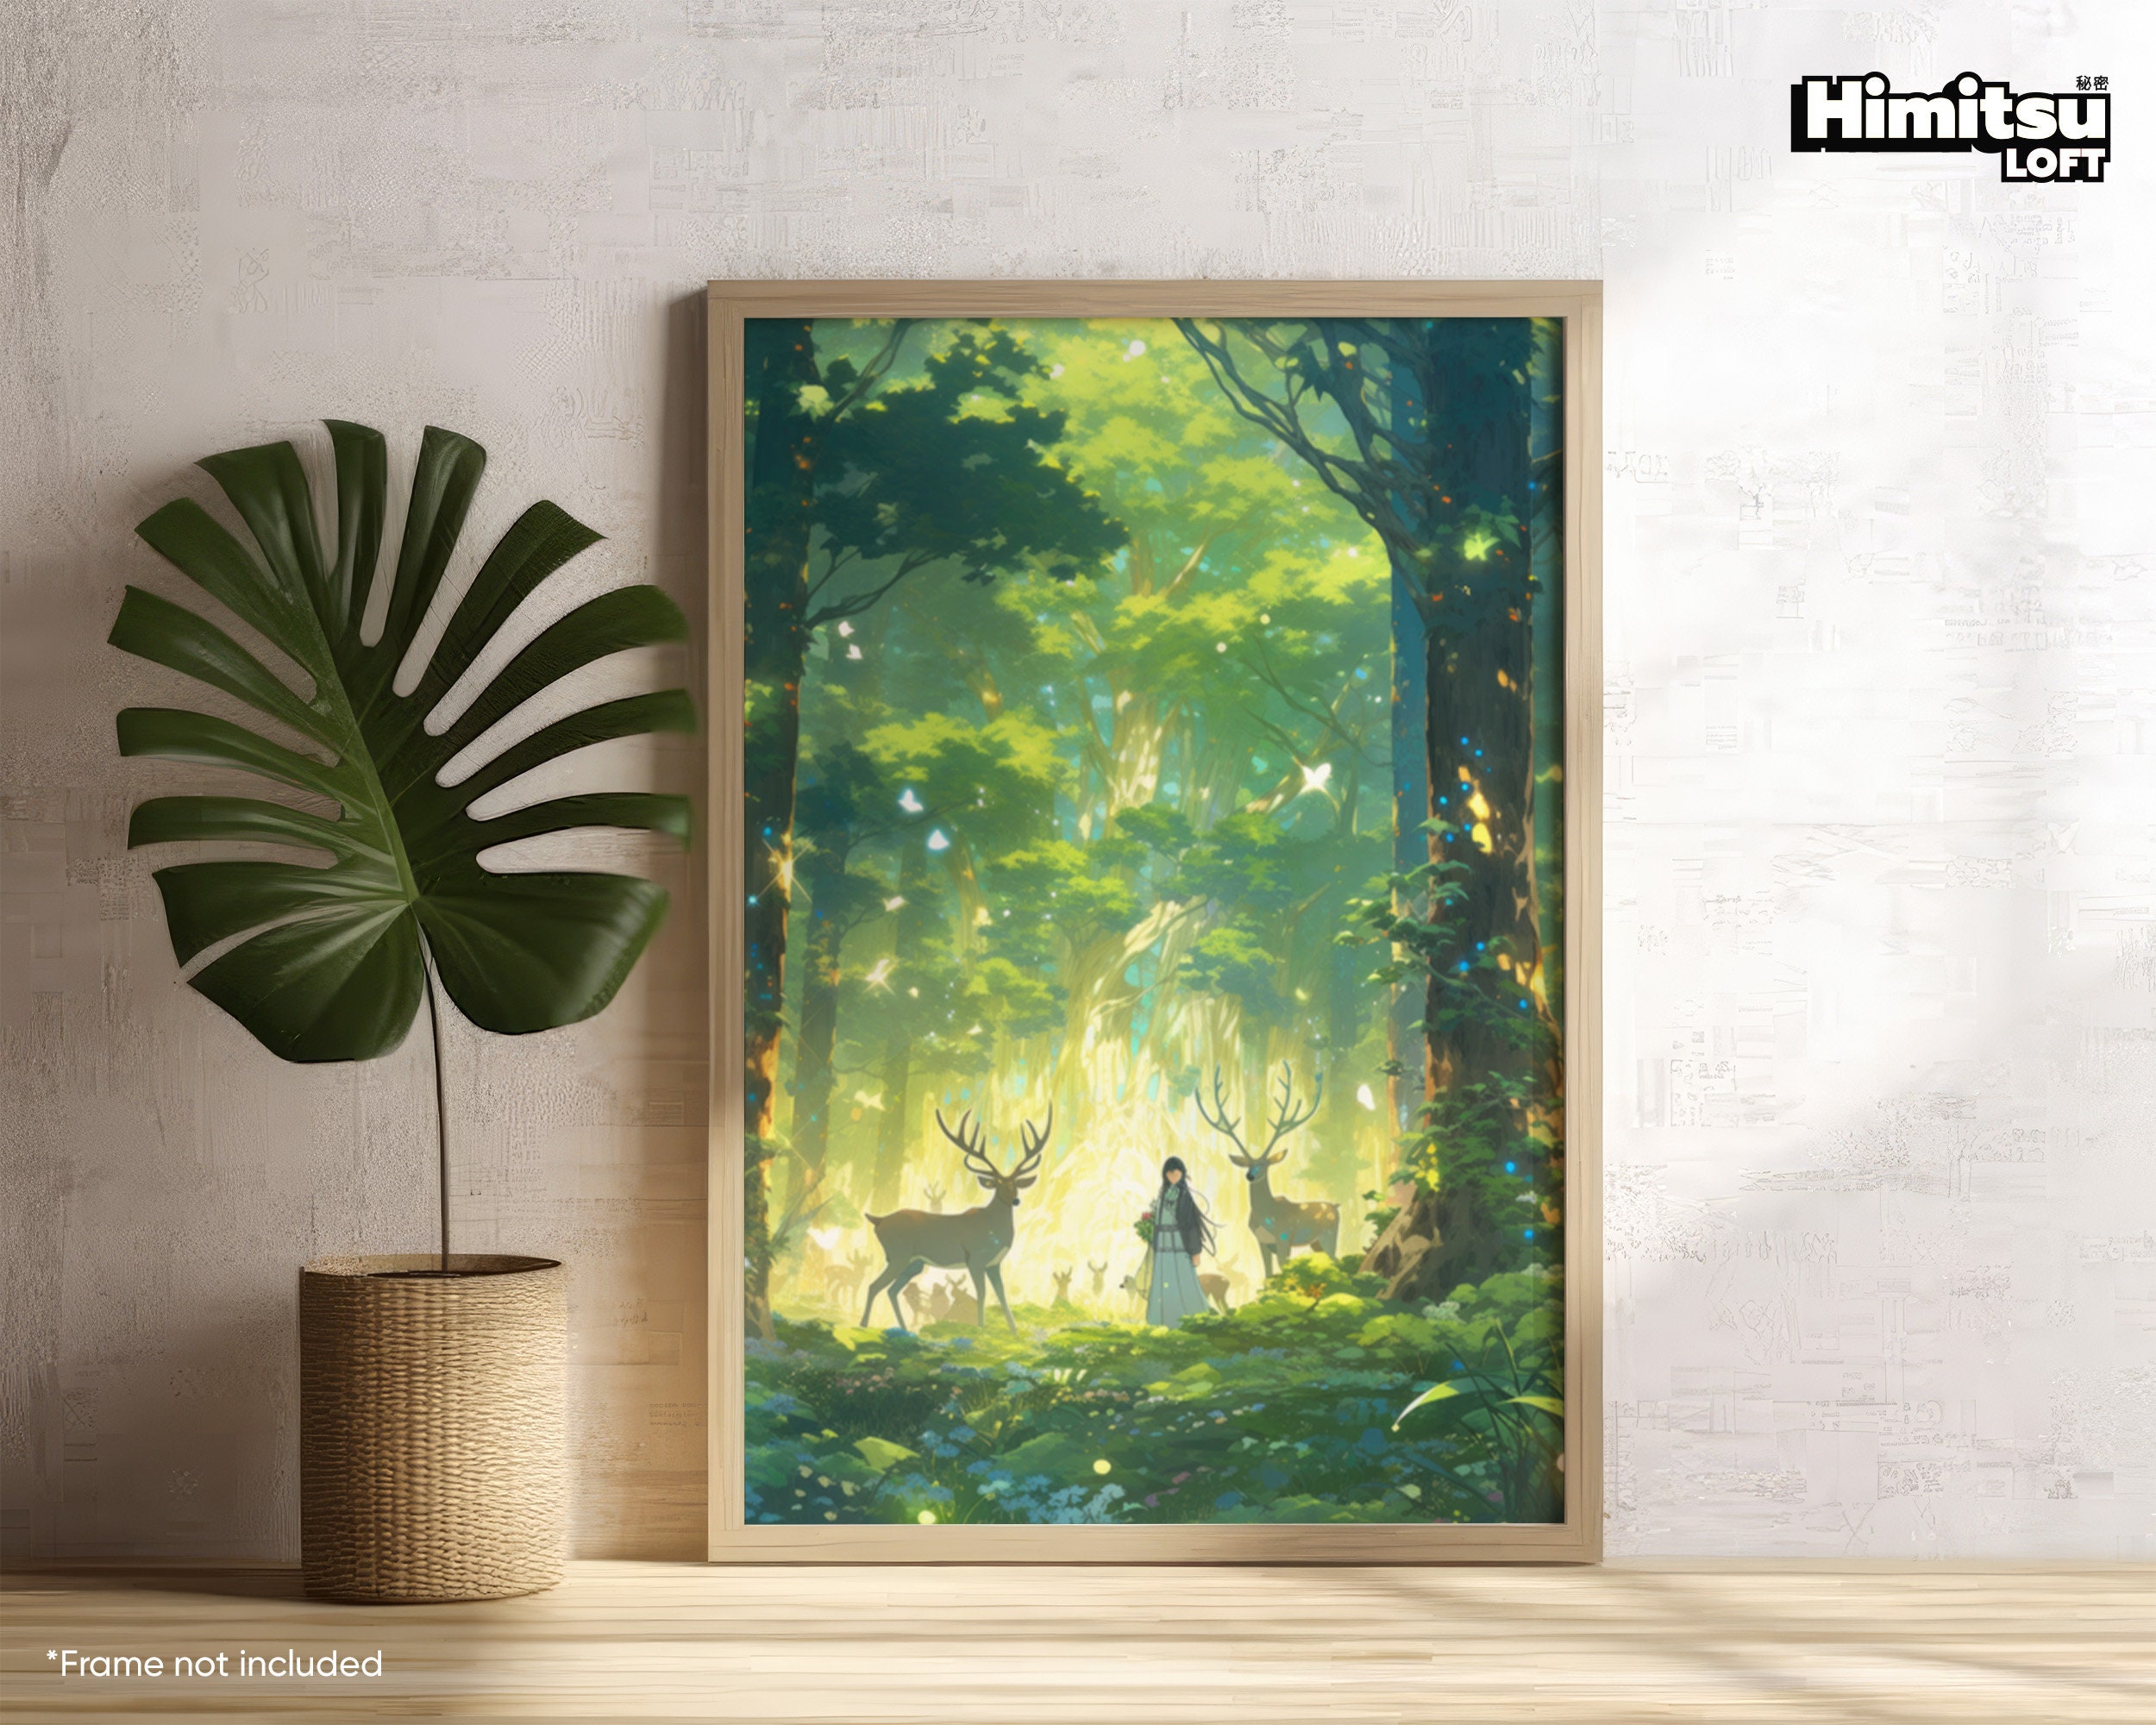 Harem in The Labyrinth of Another World Characters Anime Girls (8) Room  Aesthetics Posters Canvas Posters Bedroom Decoration Sports Office  Decoration Gifts Wall Art Decoration Printing Posters 16x24in : :  Home